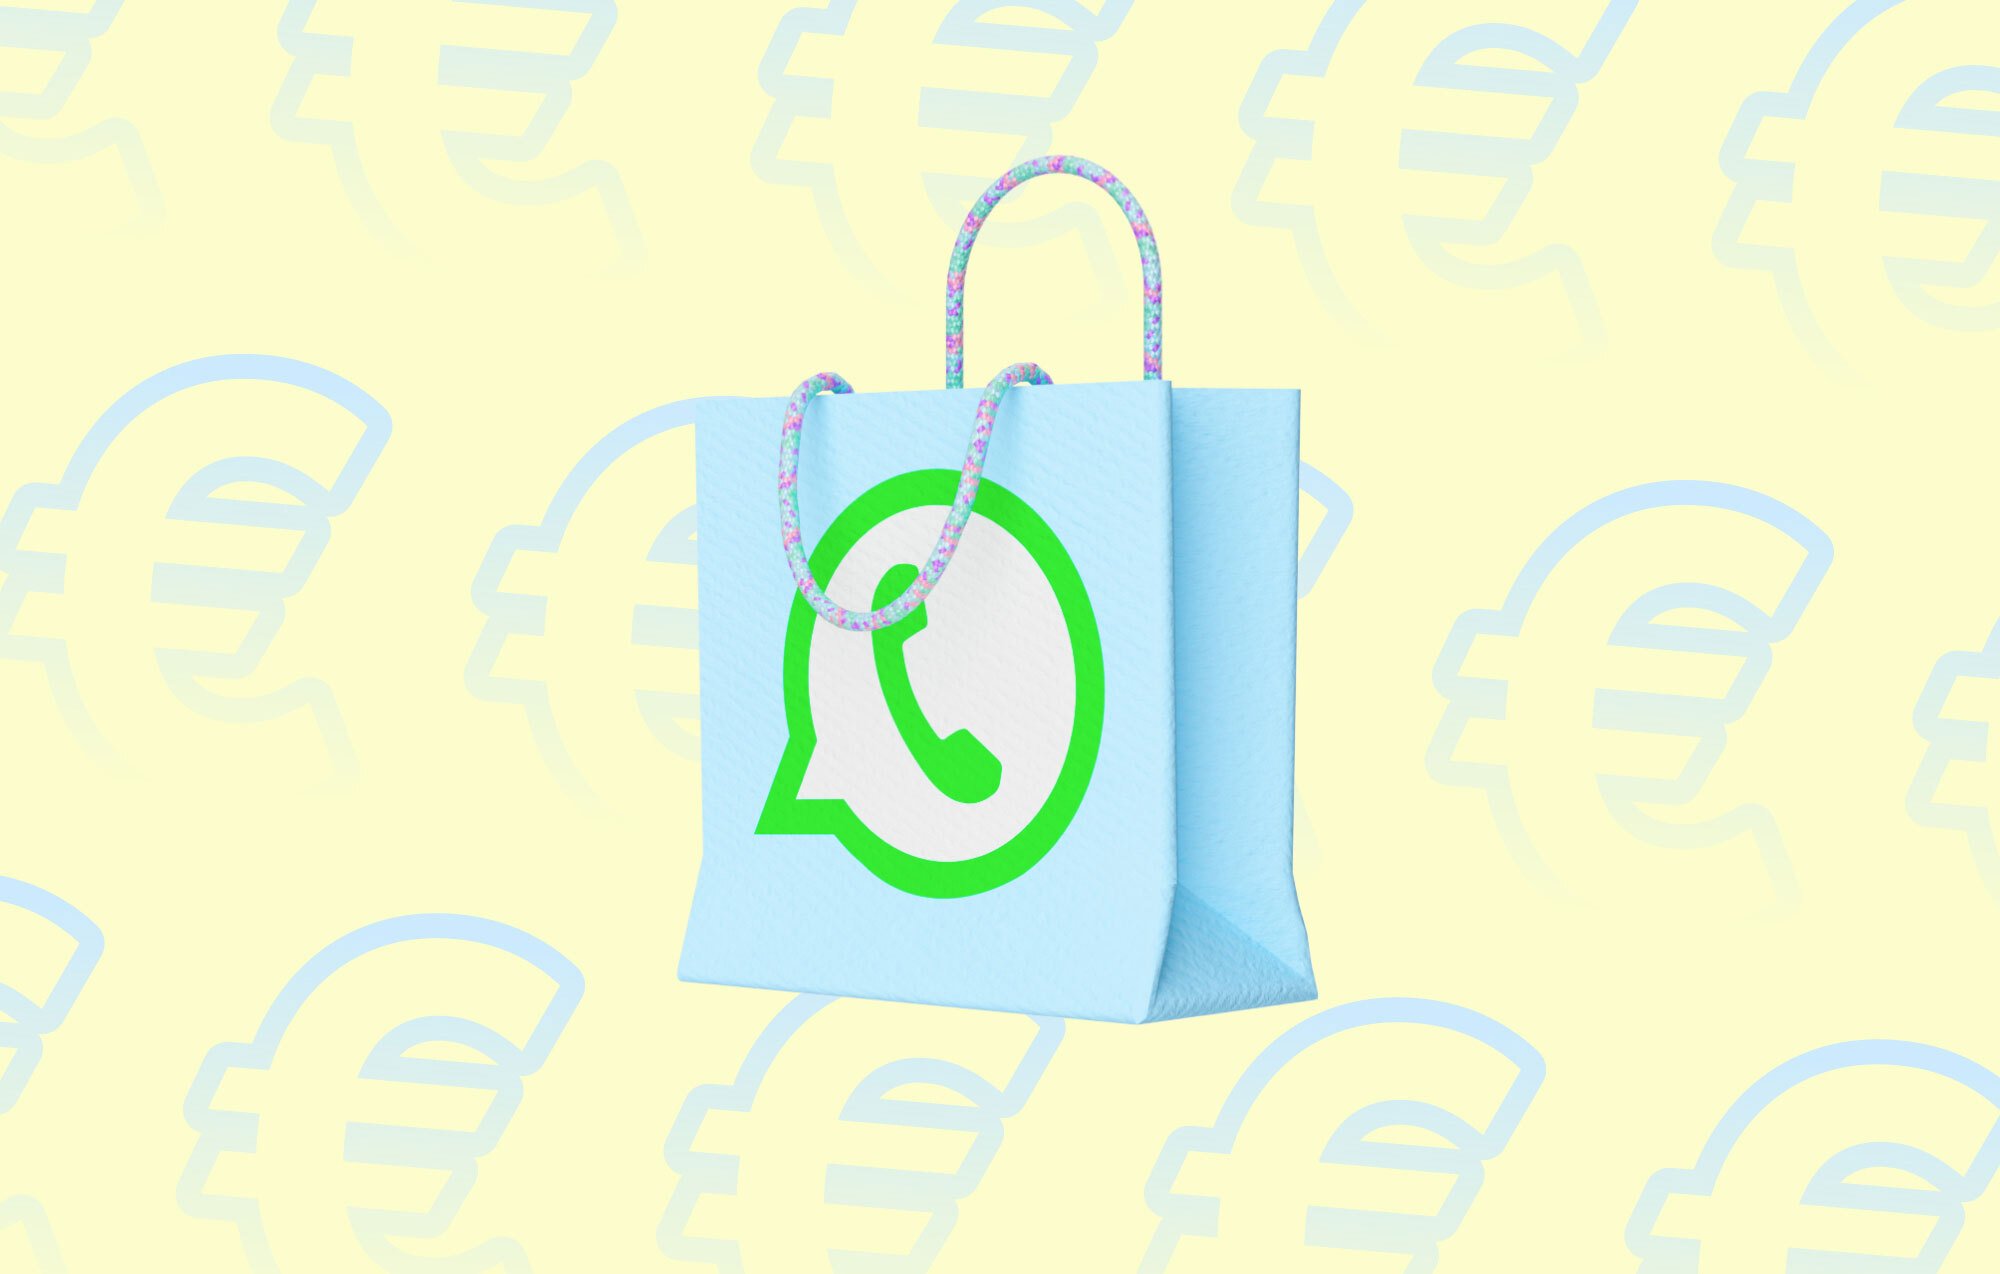 Shopping bag with WhatsApp logo – for article about how to make WhatsApp Business a success for eCommerce brands